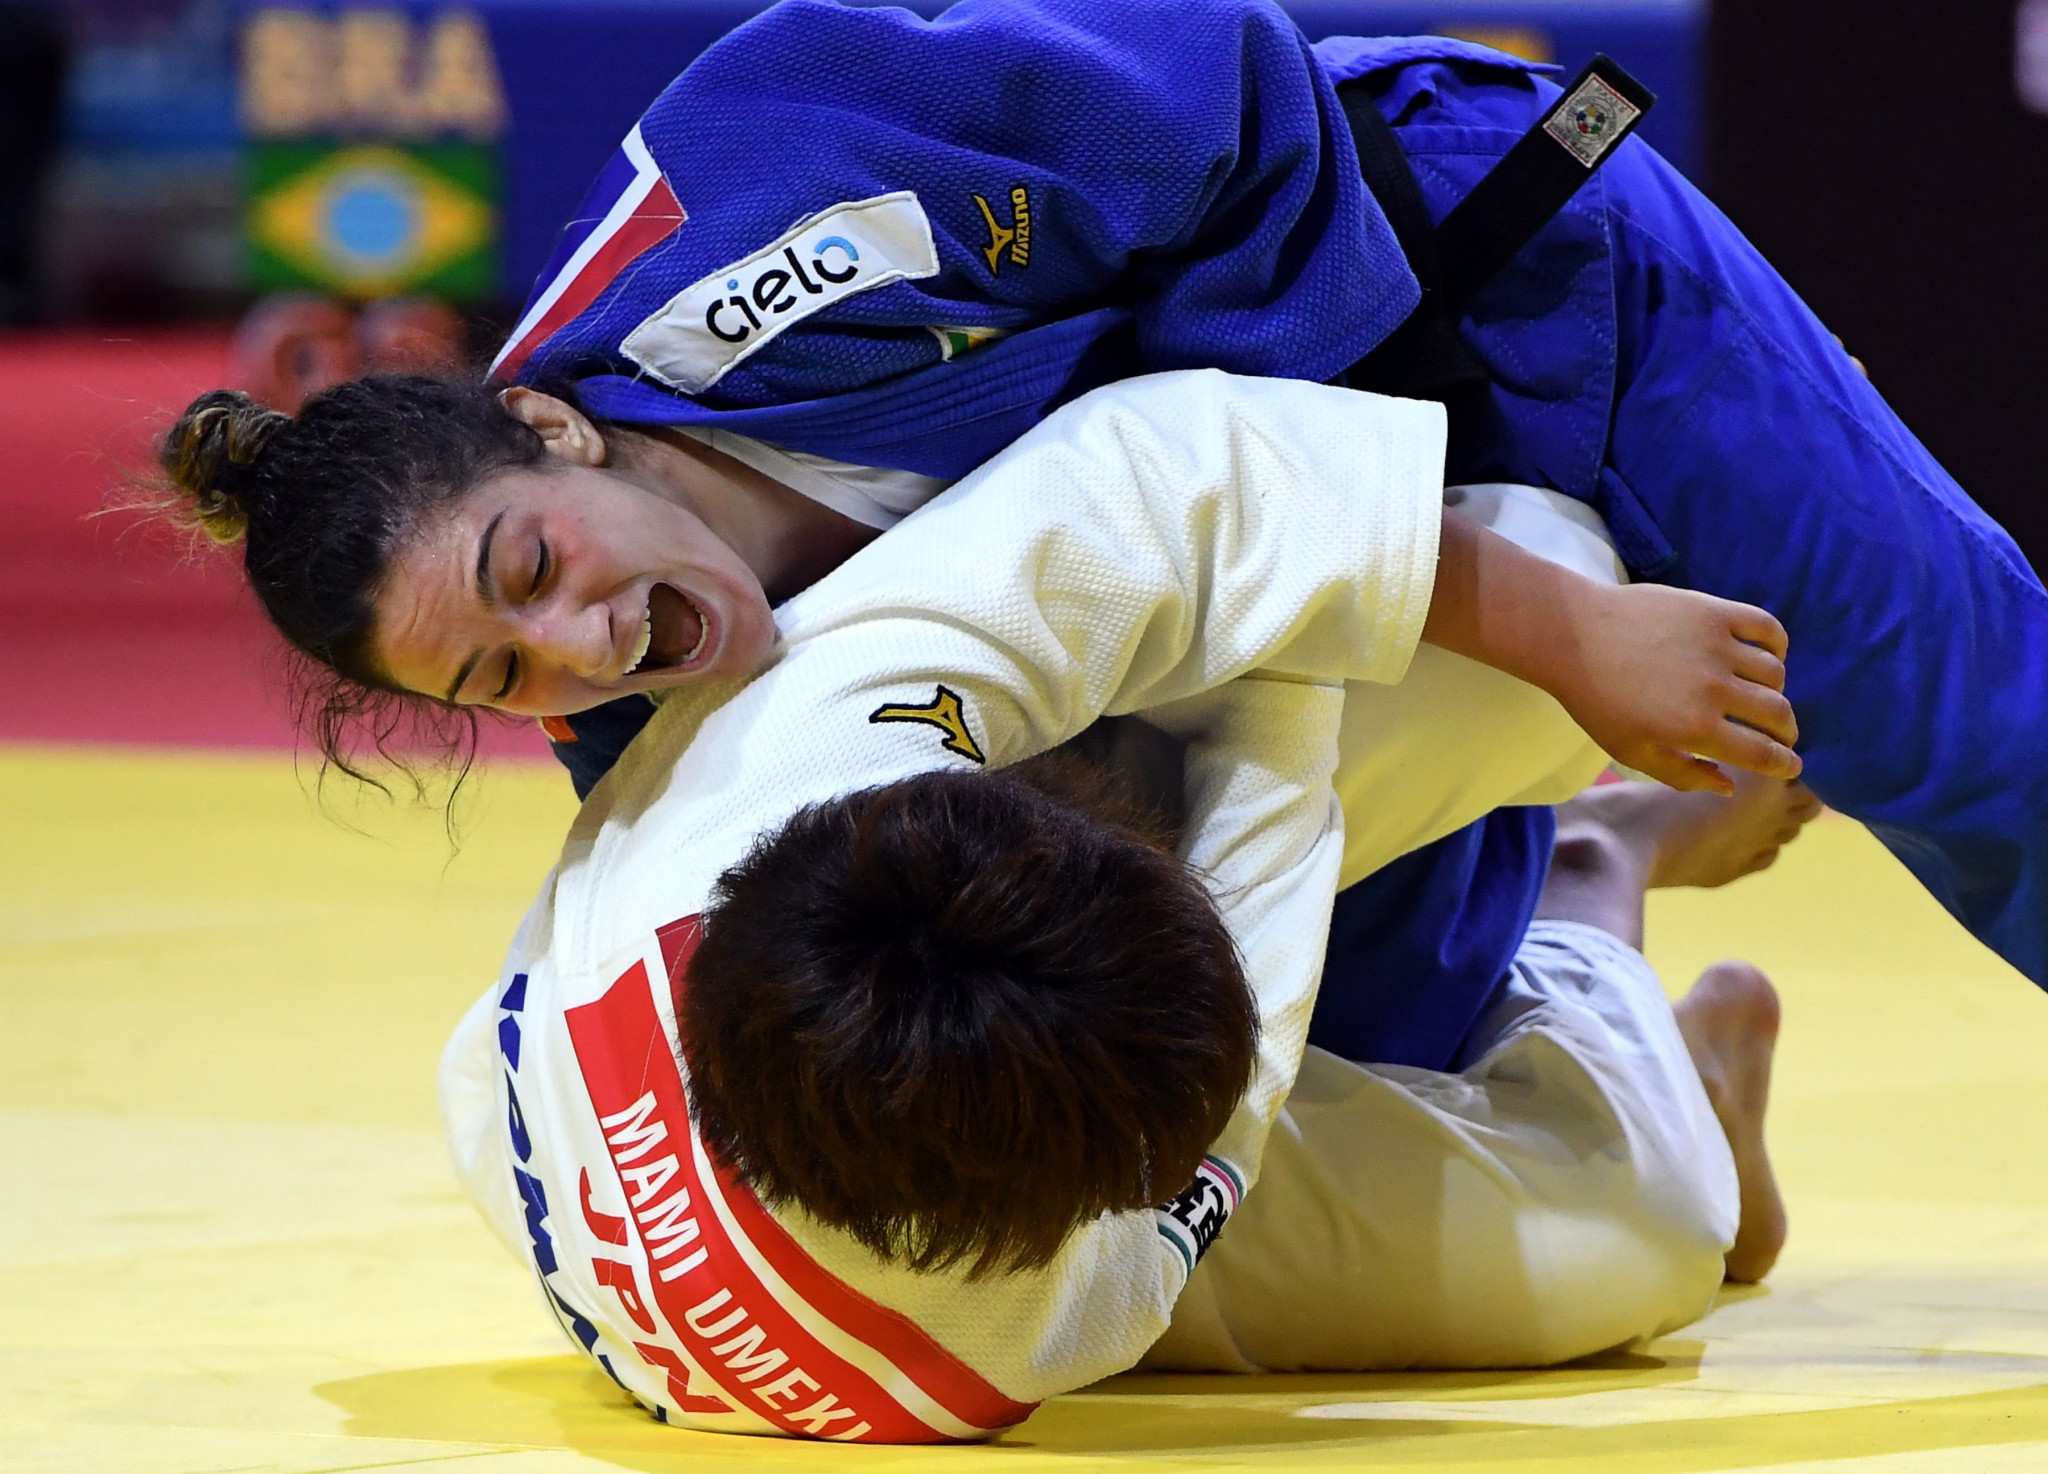 Mayra Aguiar of Brazil will begin her judo season ©Getty Images